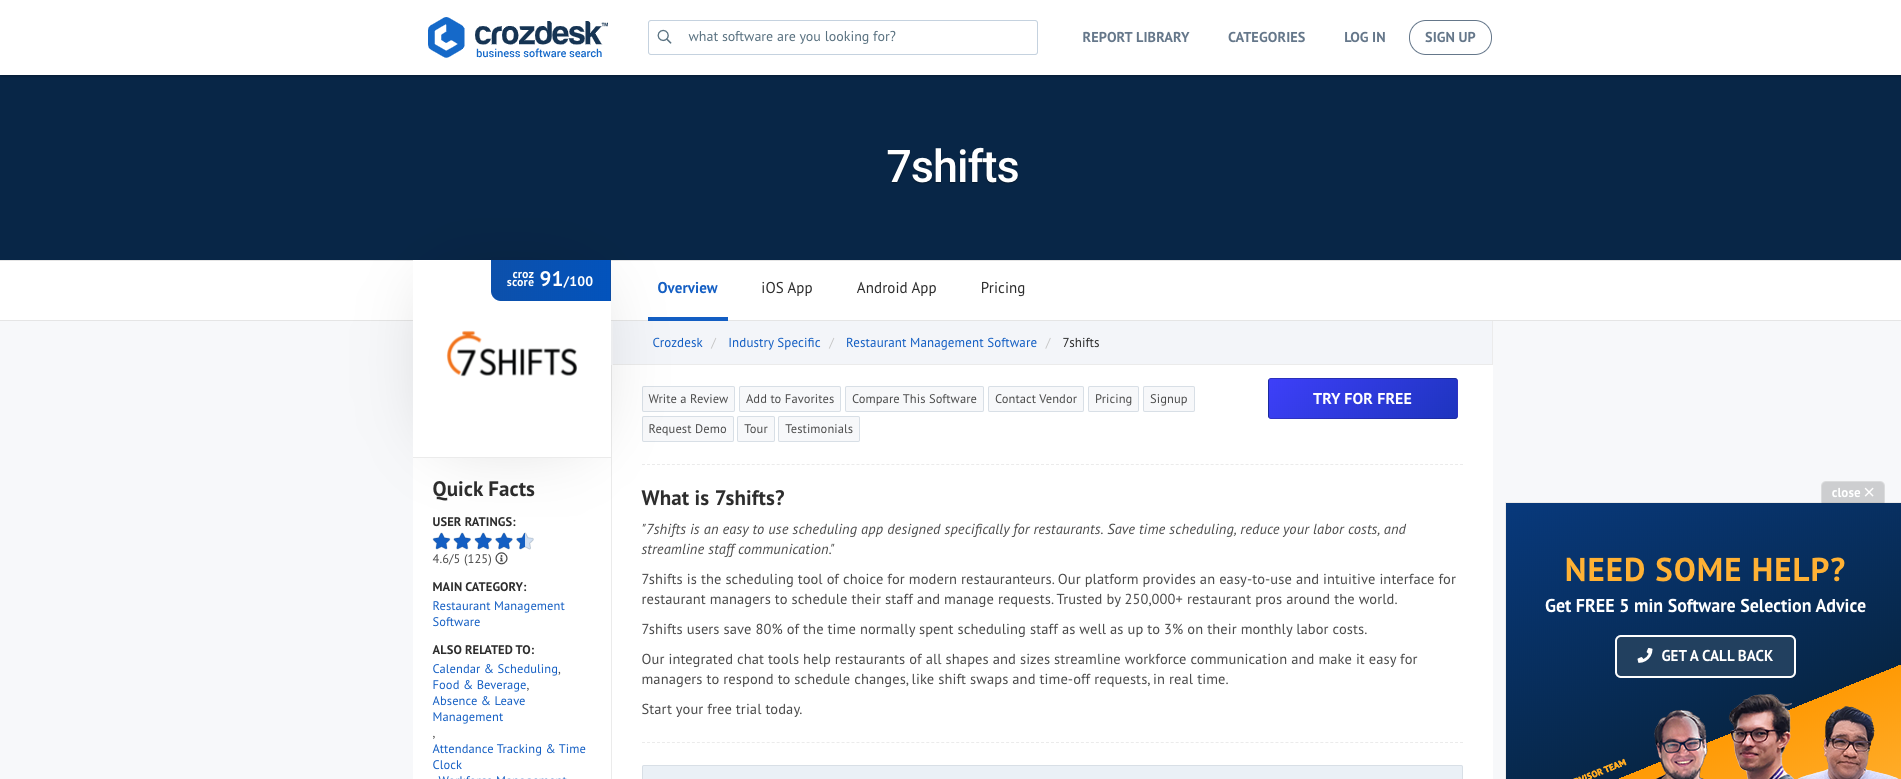 Screenshot of the Crozdesk interface showcasing the 7shifts review page.